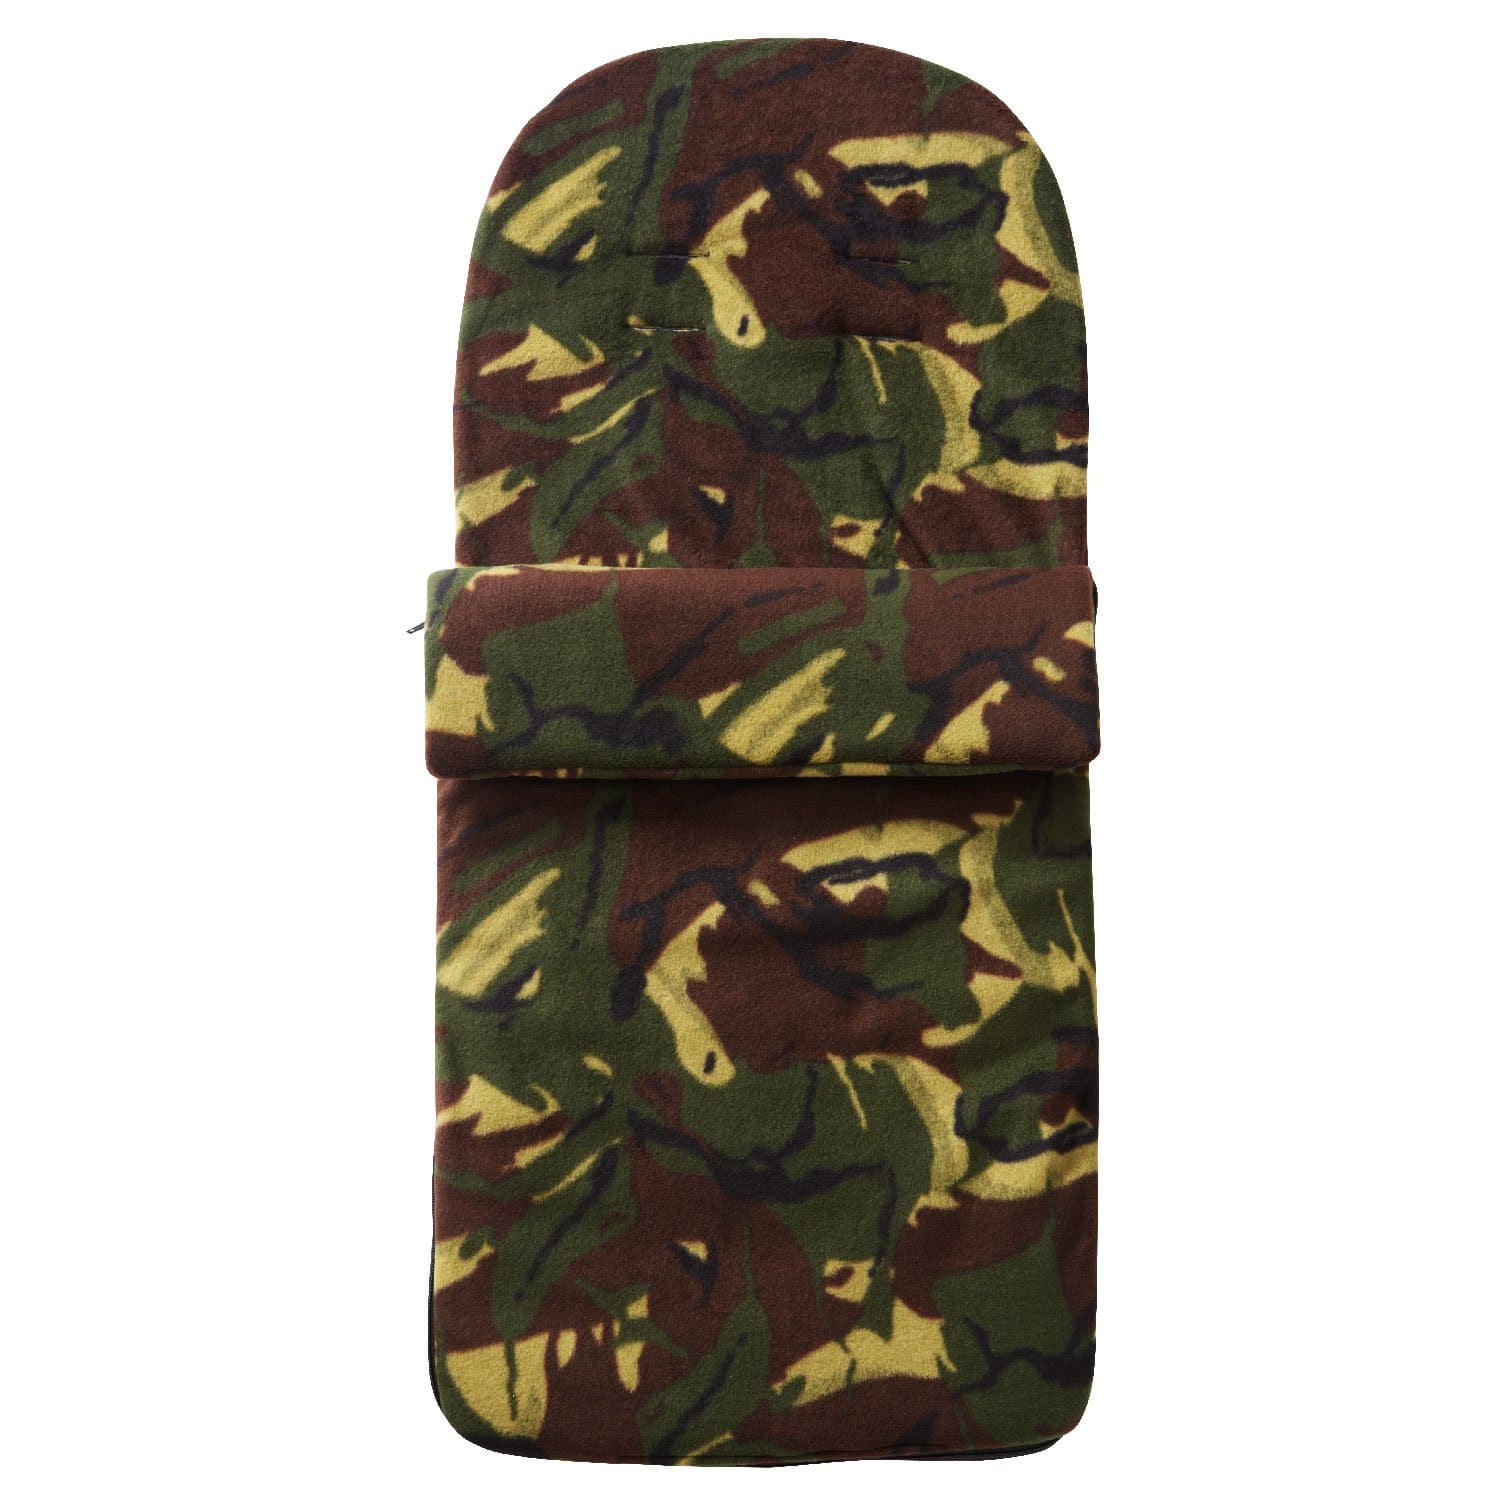 Universal Fleece Pushchair Footmuff / Cosy Toes - Fits All Pushchairs / Prams And Buggies Camouflage Fits All Models 